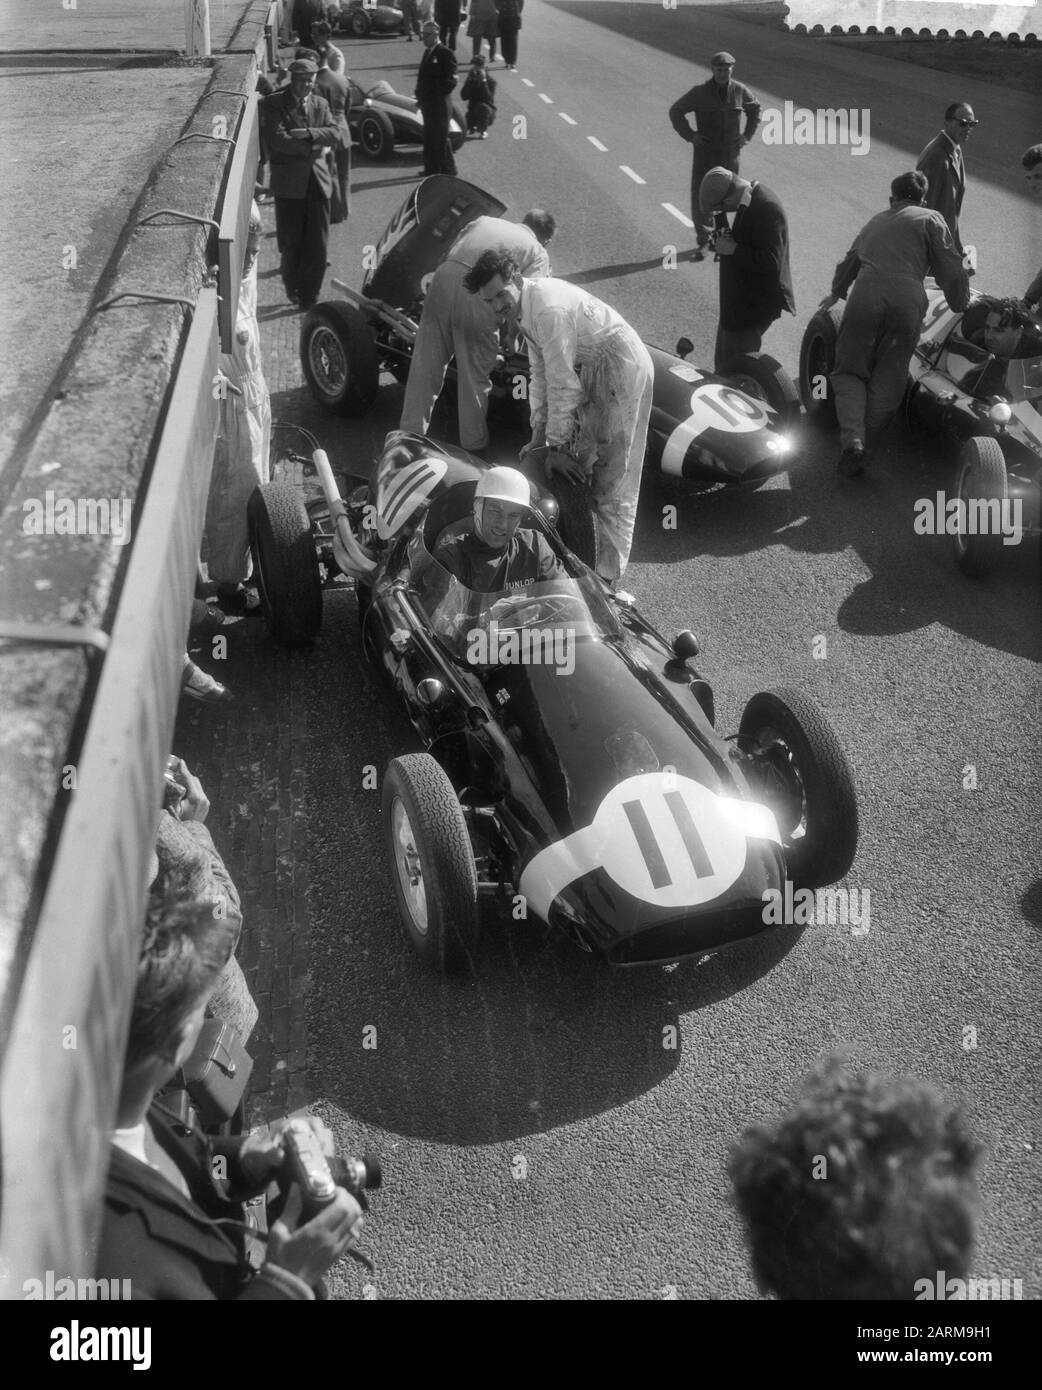 Grand Prix Zandvoort 1959  Training at the Circuit Van Zandvoort of the Grand Prix, Stirling Moss starts for a training round Date: May 29, 1959 Location: Noord-Holland, Zandvoort Keywords: cars, motor racing, circuits, sports Person name: Moss, Stirling Stock Photo